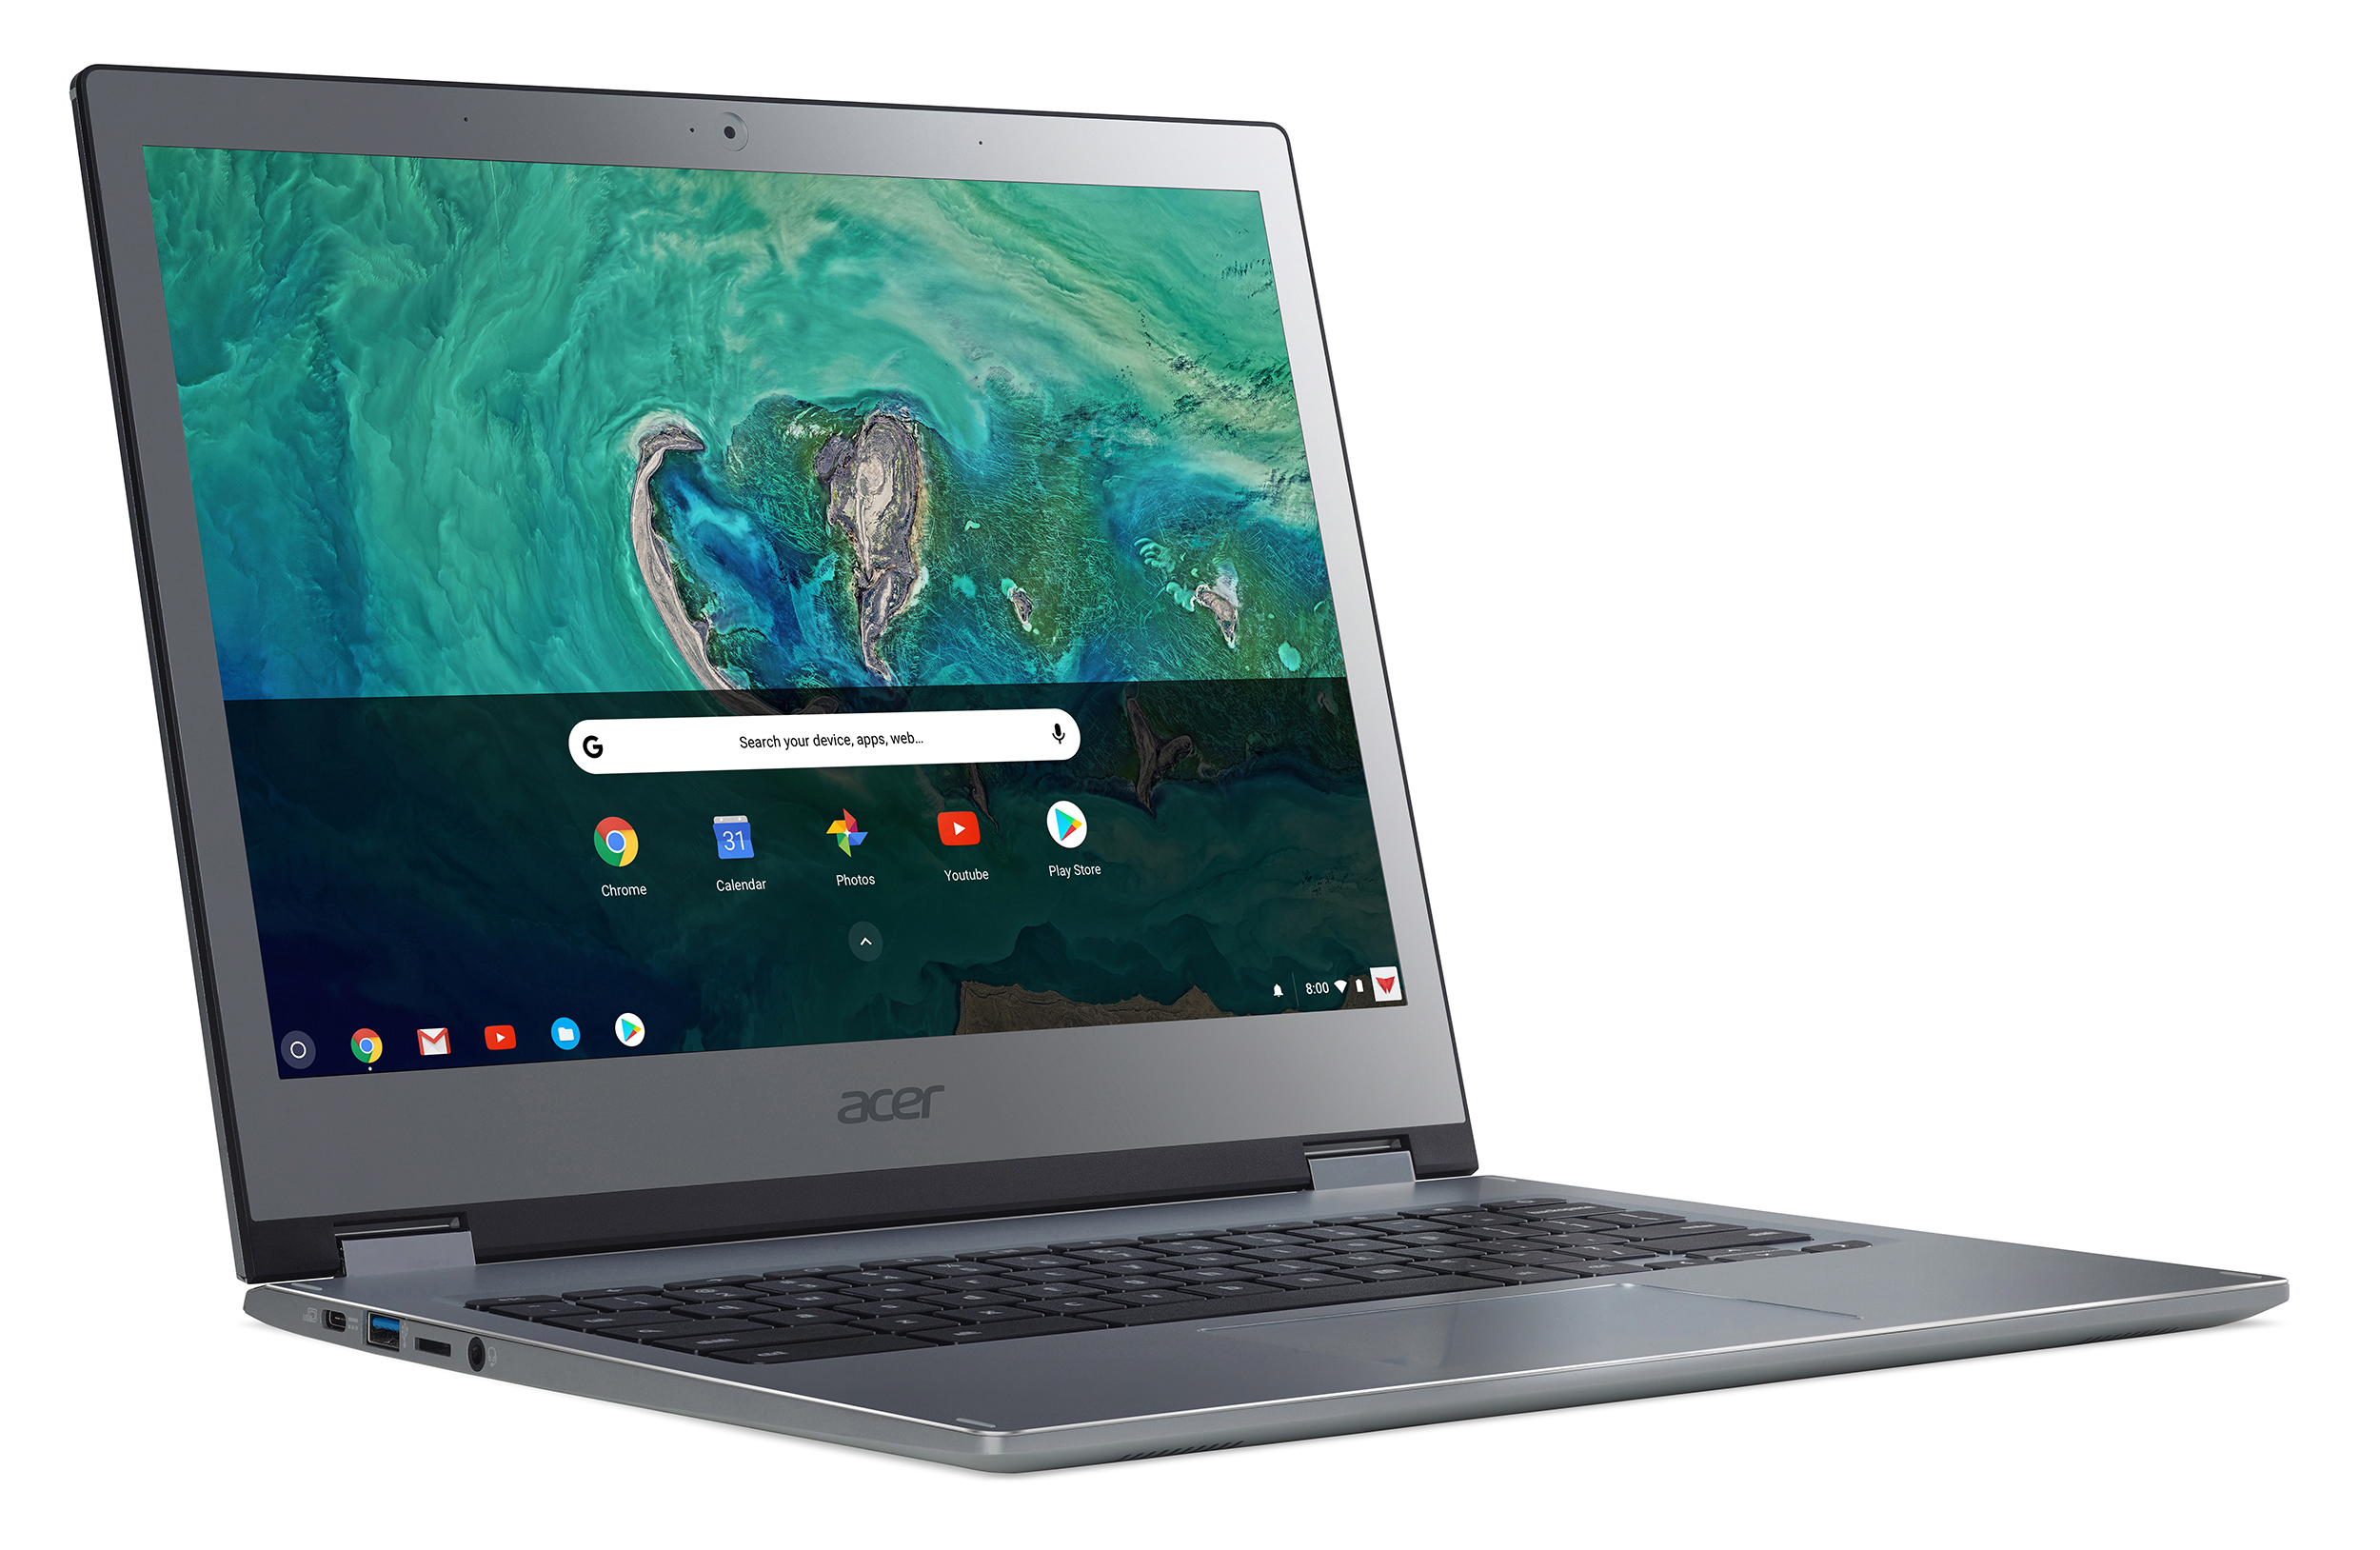 A rendered image of the Acer Chromebook 13 opened with the screen on.